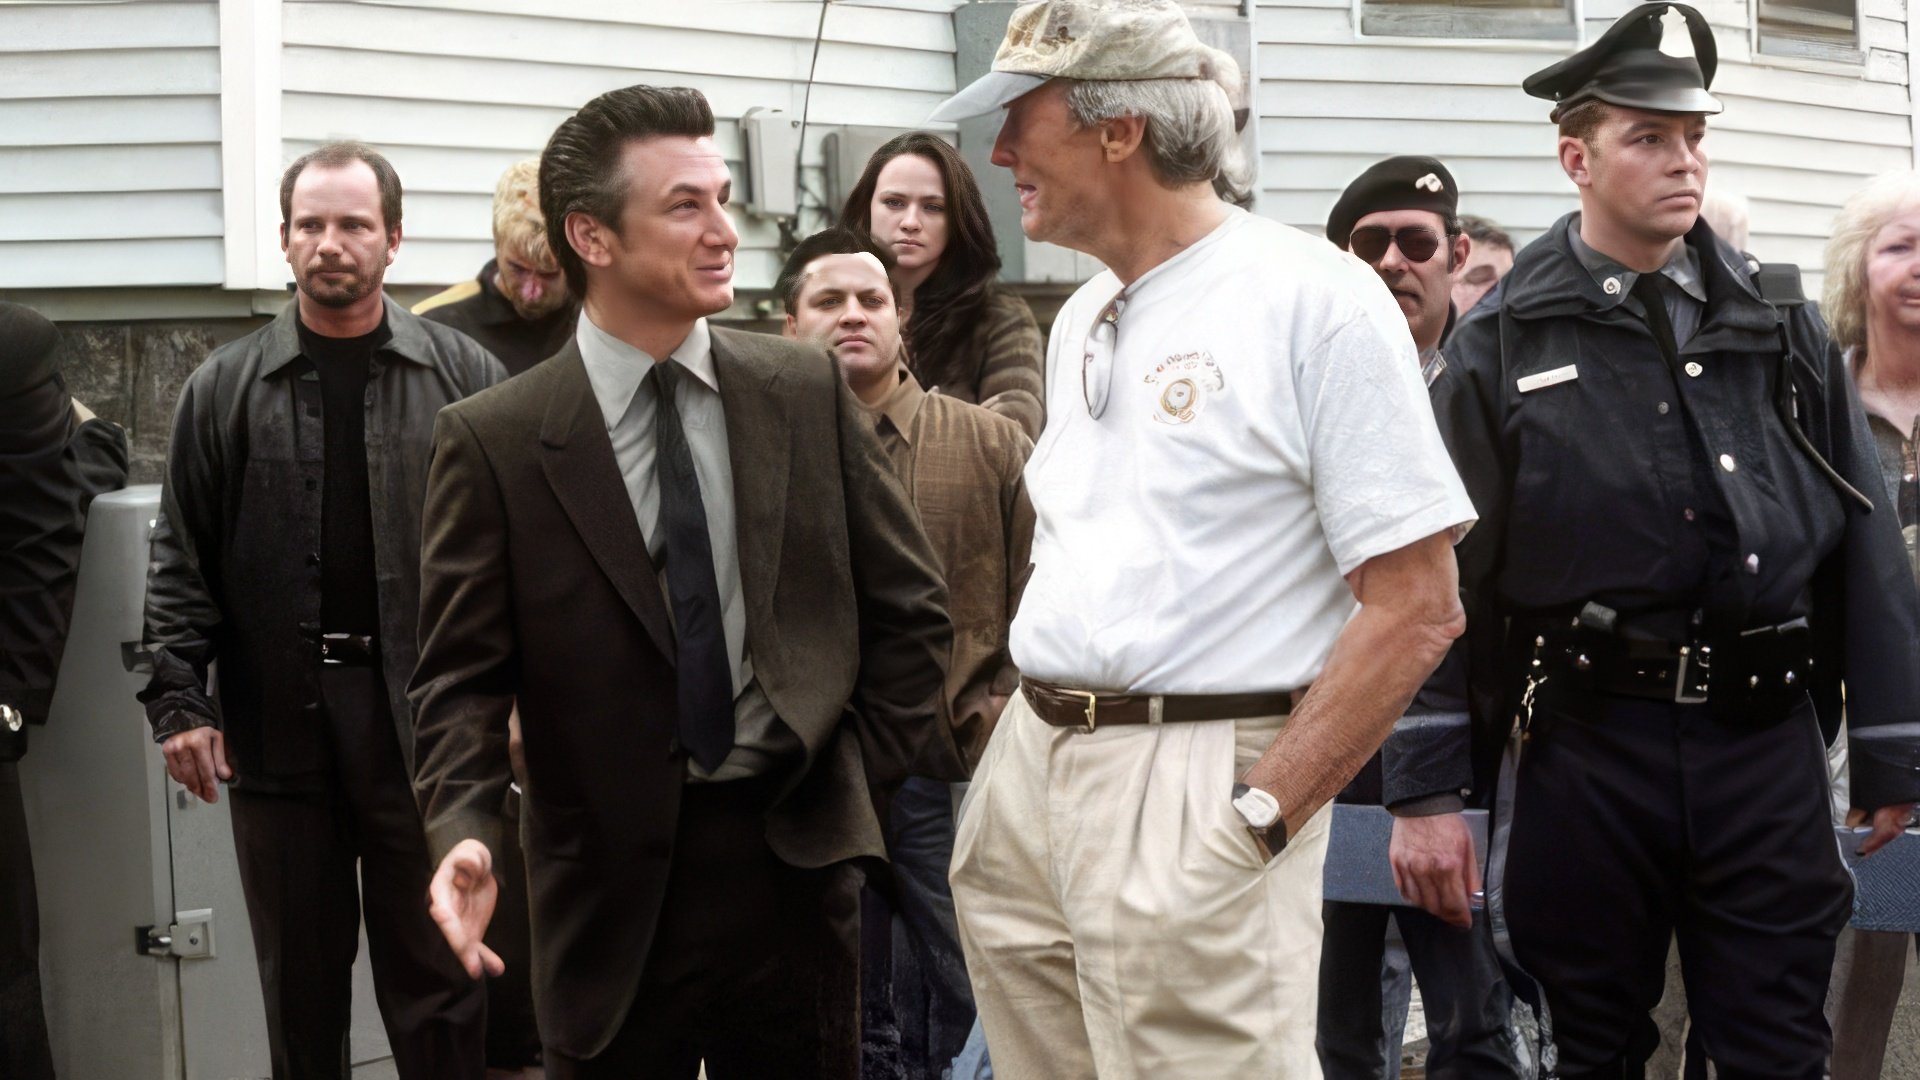 Clint Eastwood and Sean Penn on the set of the «Mystic River» thriller